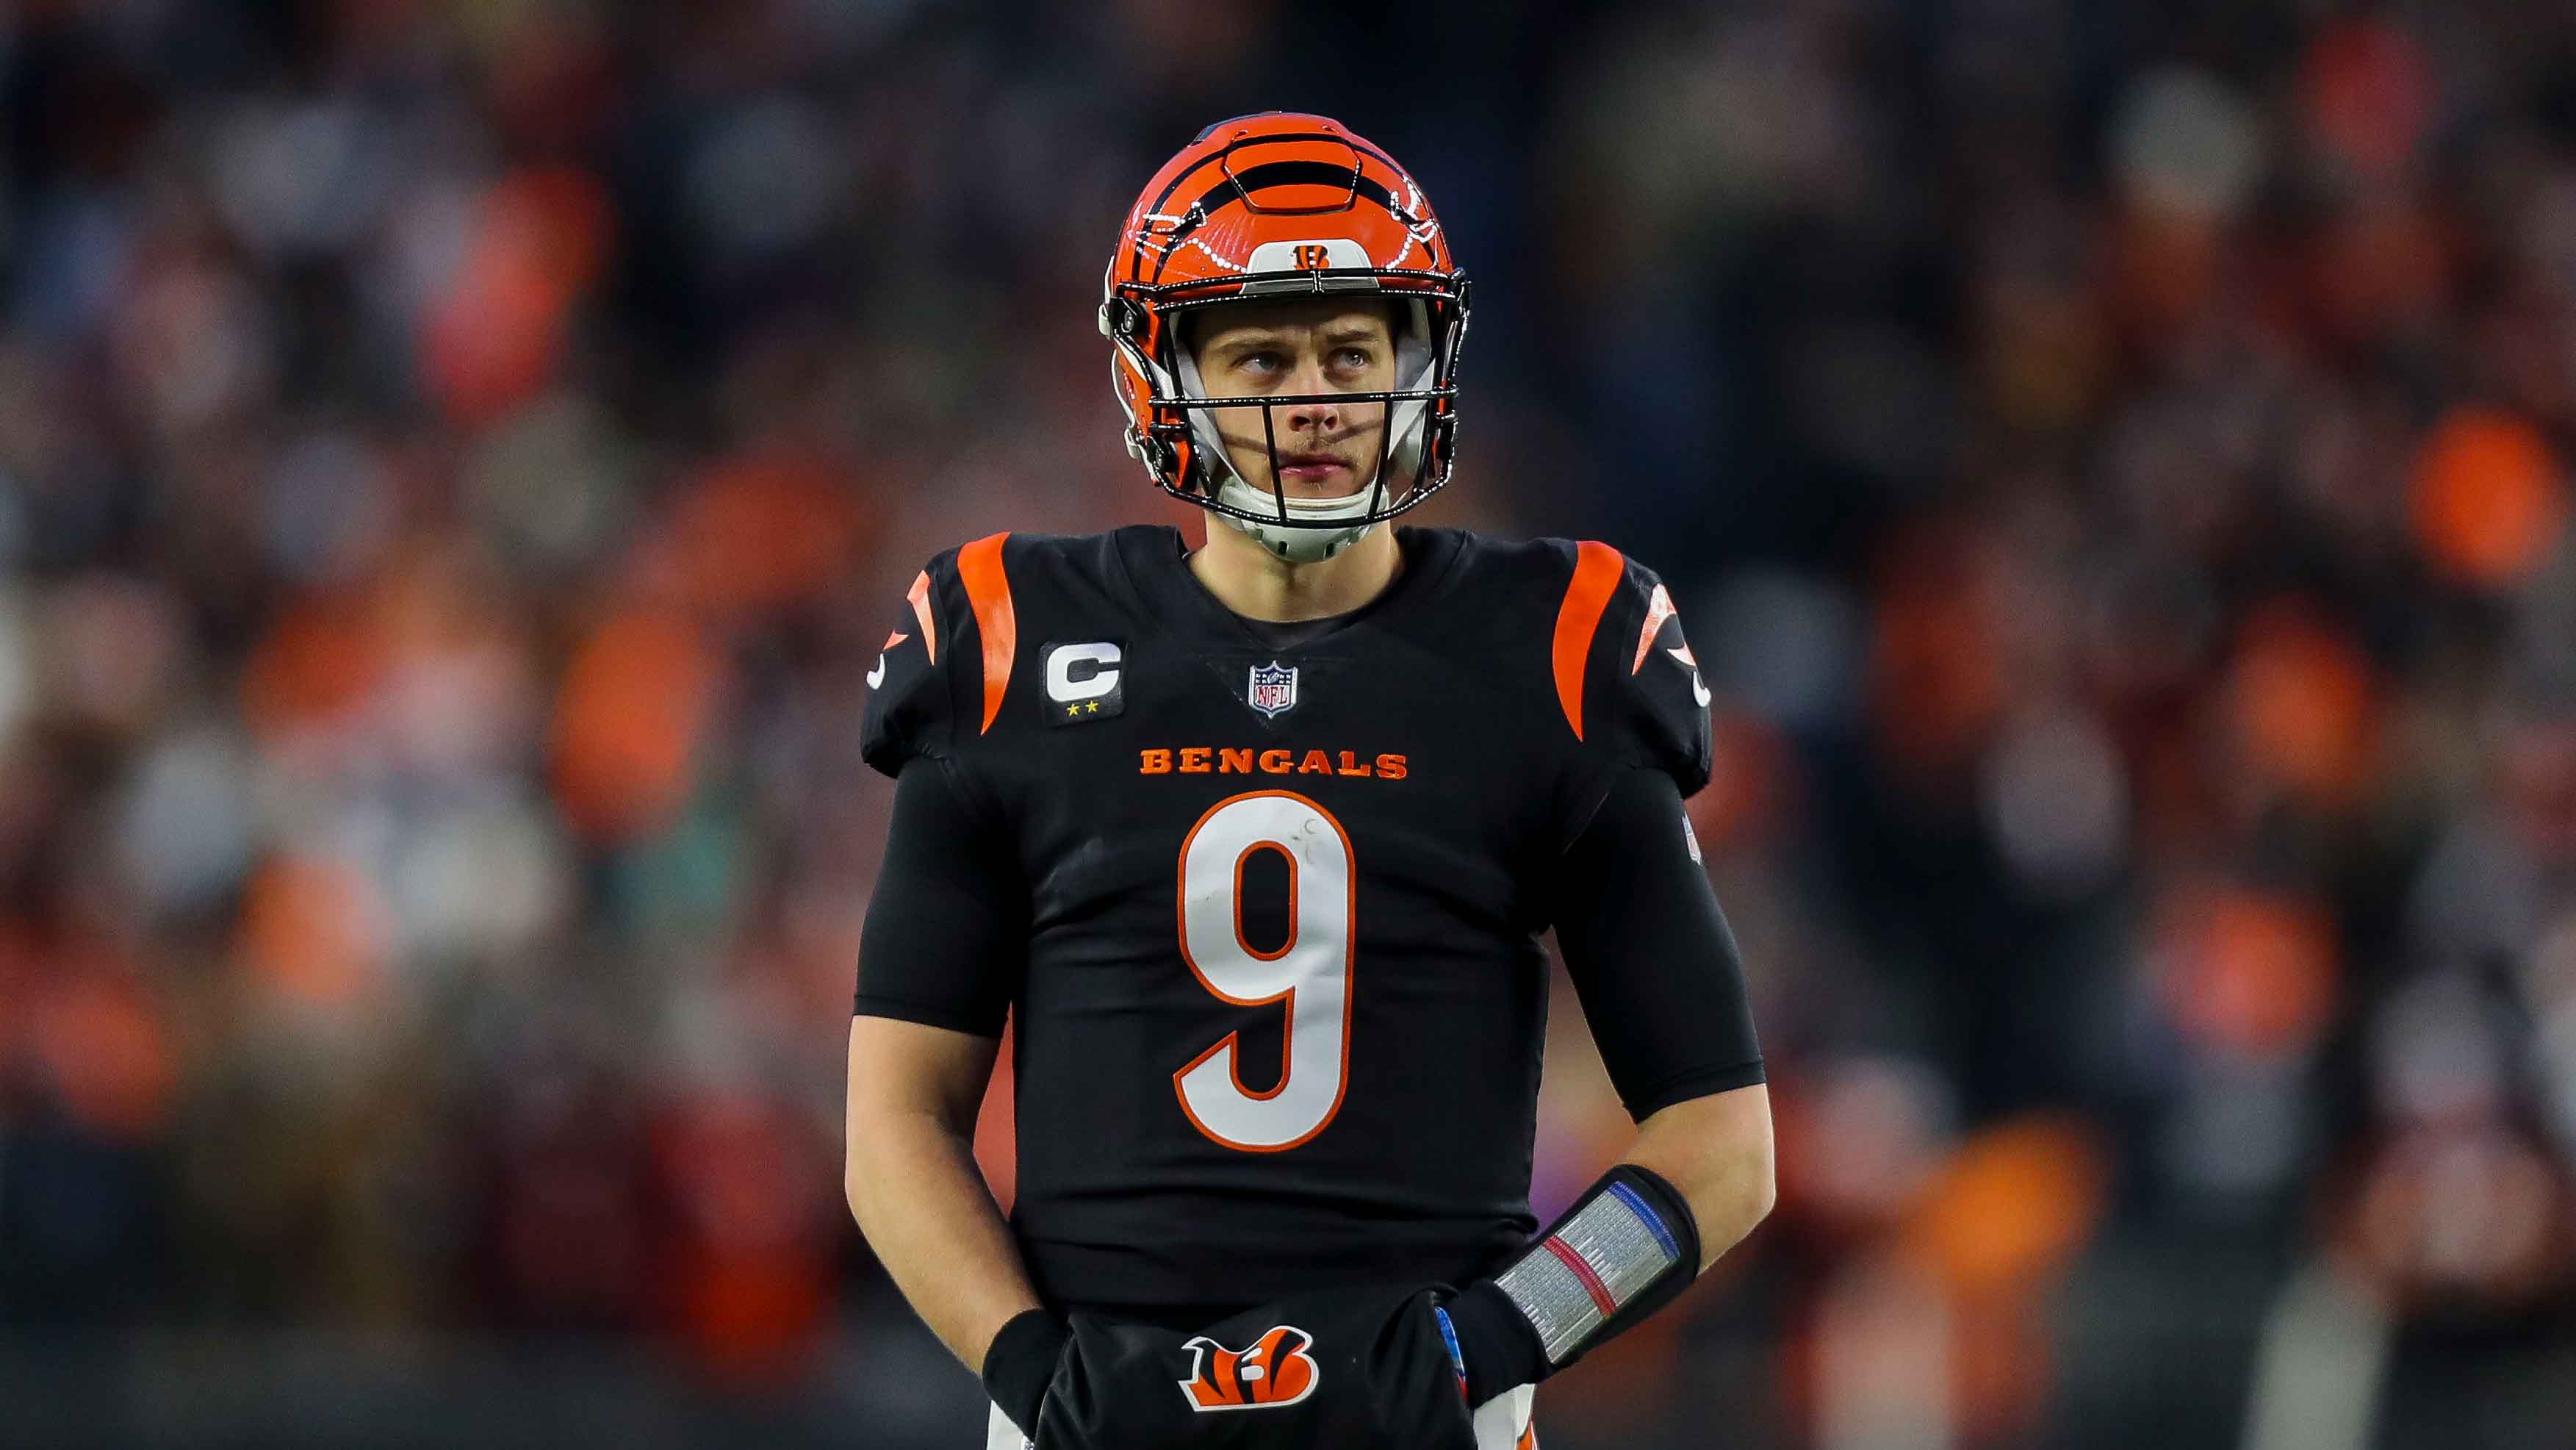 Bengals will wear black jerseys in Super Bowl, which means Rams